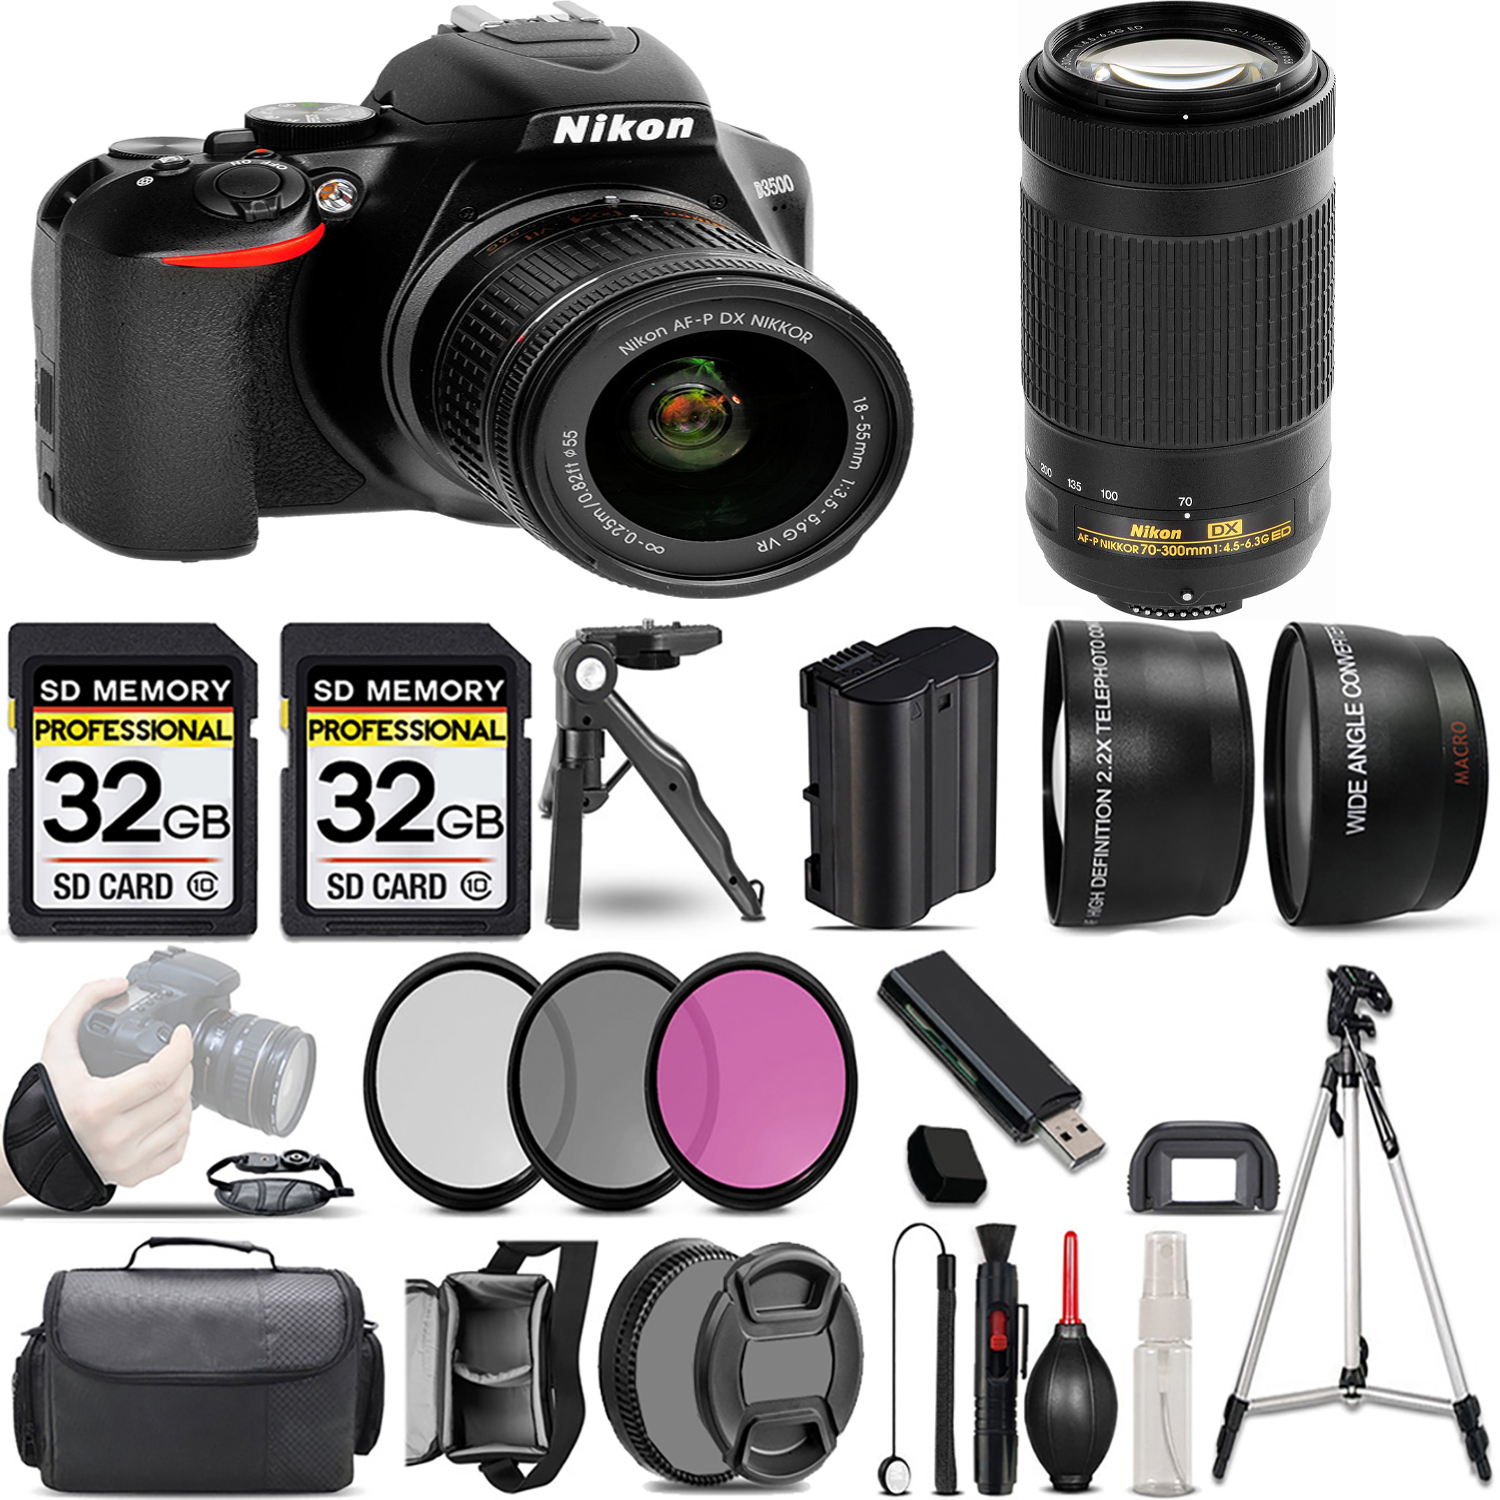 D3500 DSLR Camera with 18-55mm Lens + 70- 300mm Lens + 3 Piece Filter Set + 64GB *FREE SHIPPING*